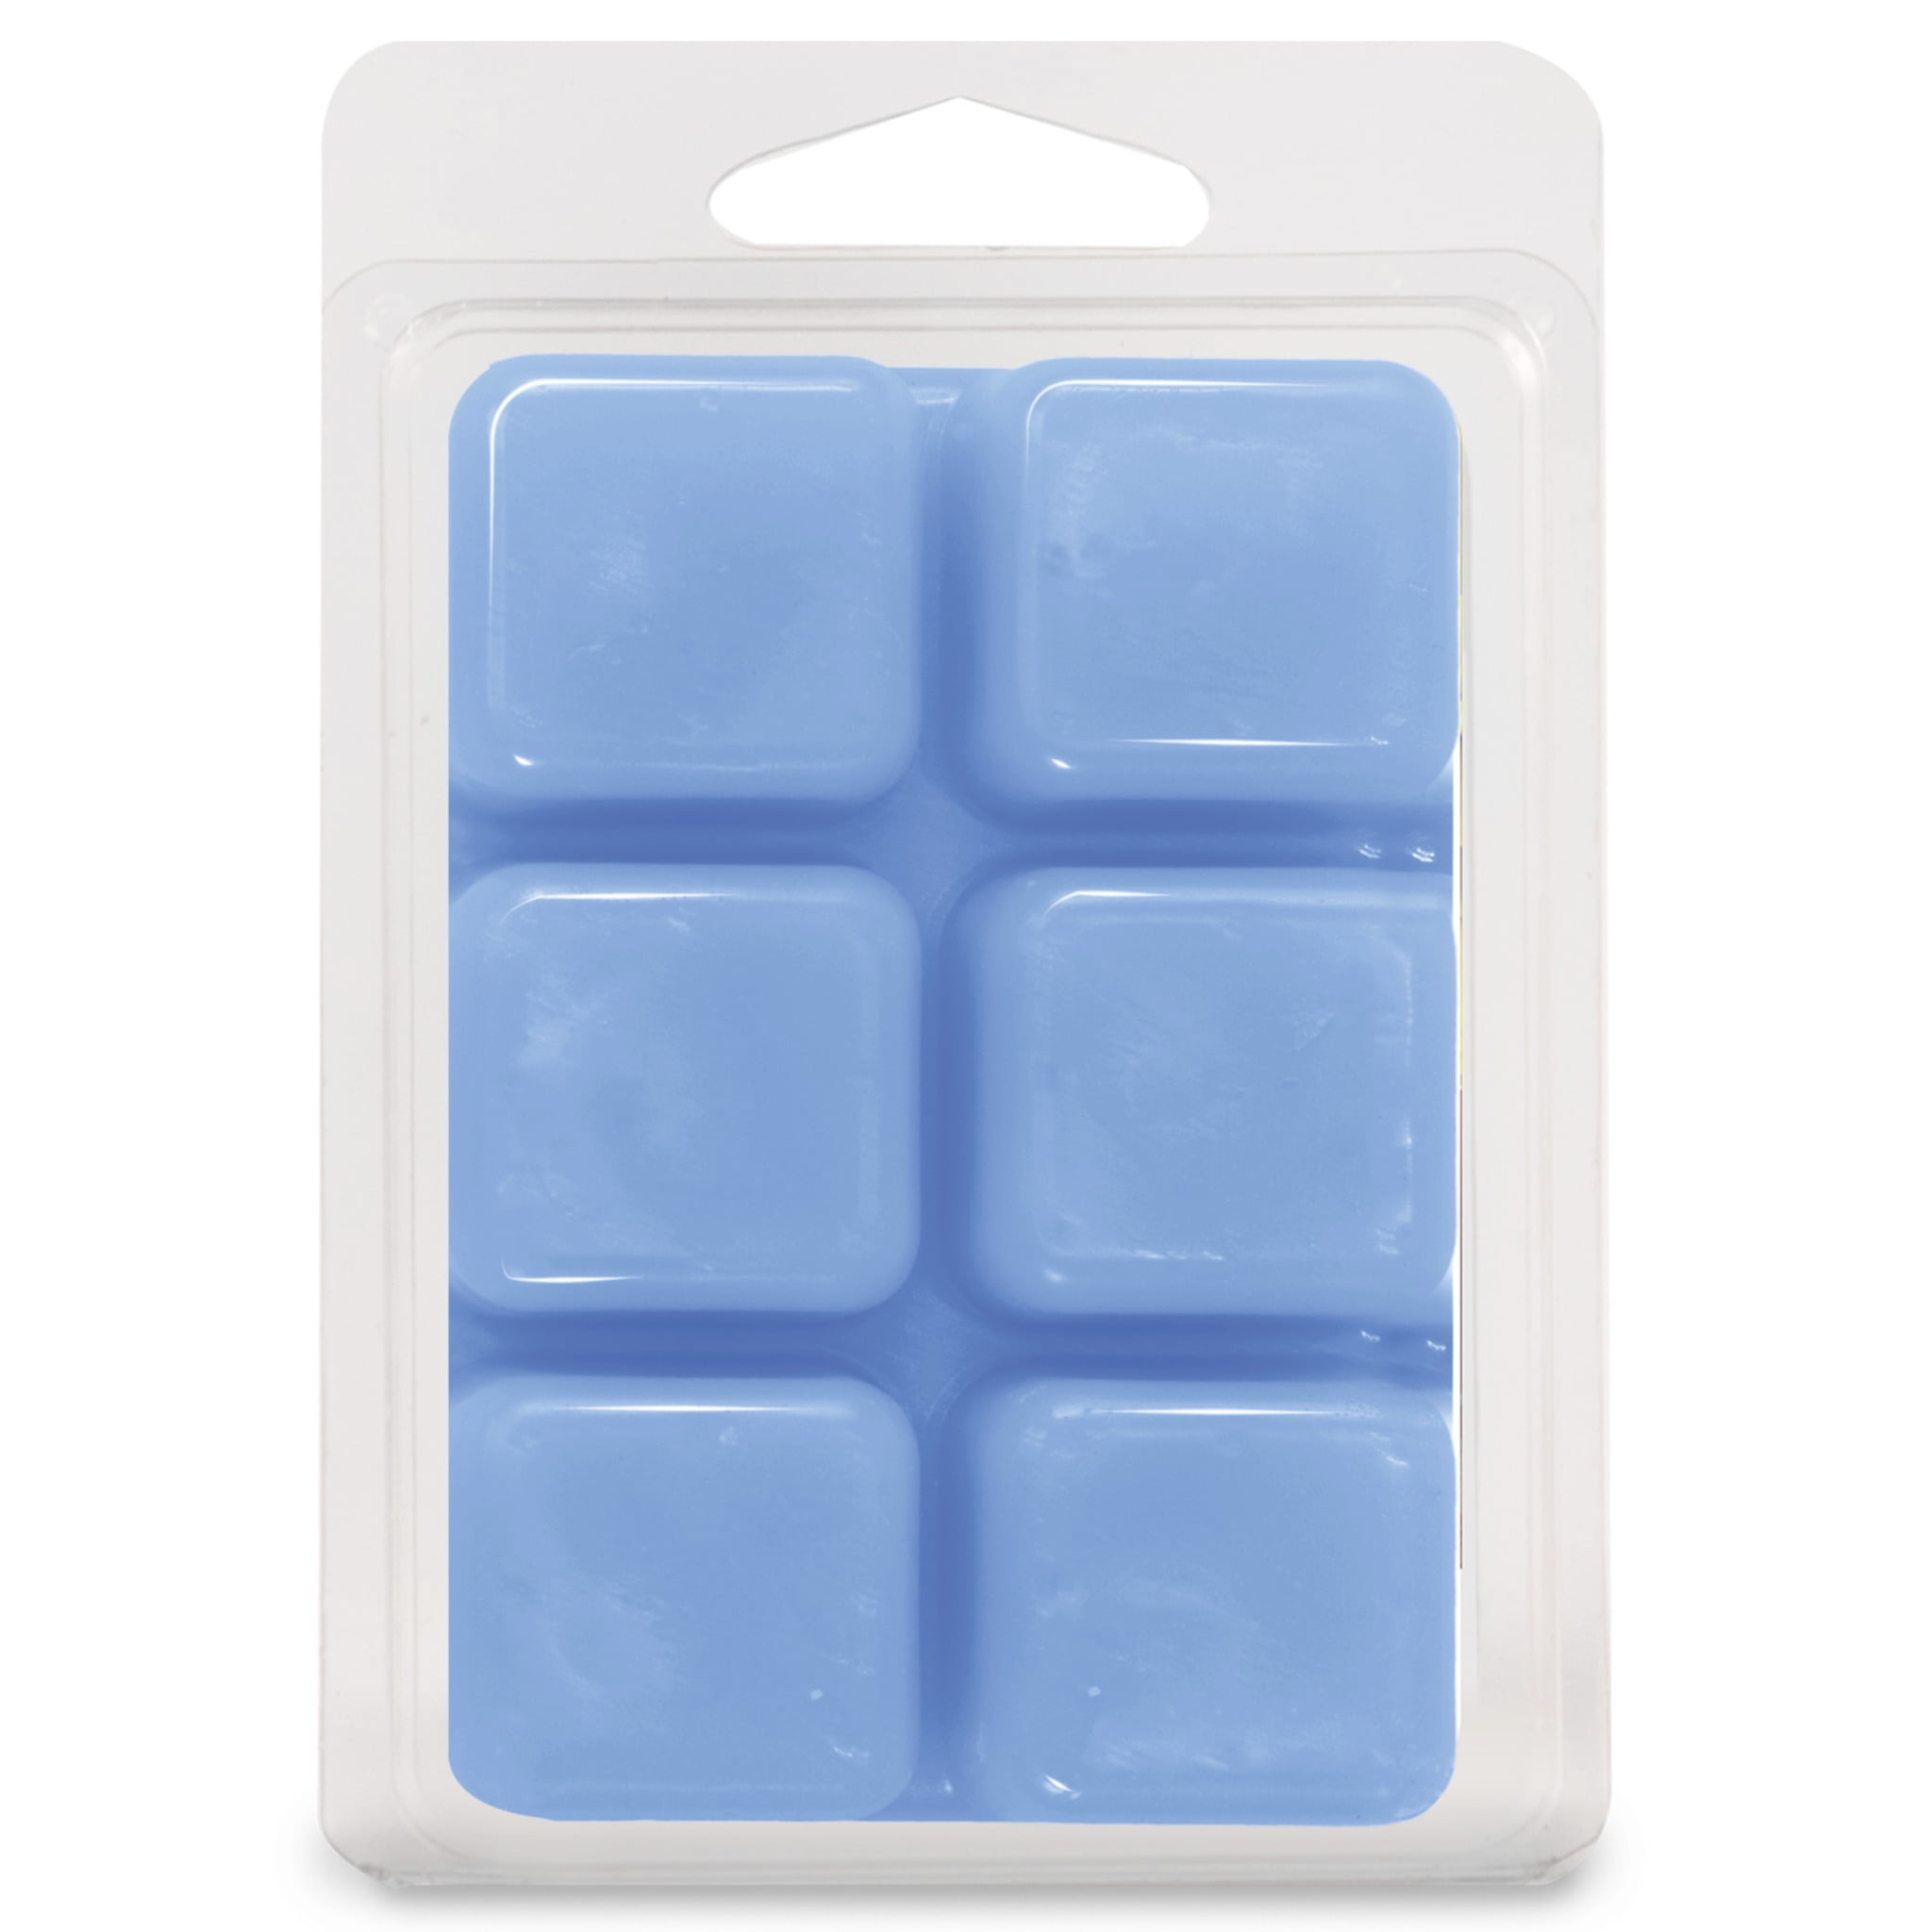 Illusion Scented Wax Melts, ScentSationals, 5 oz (Value Size